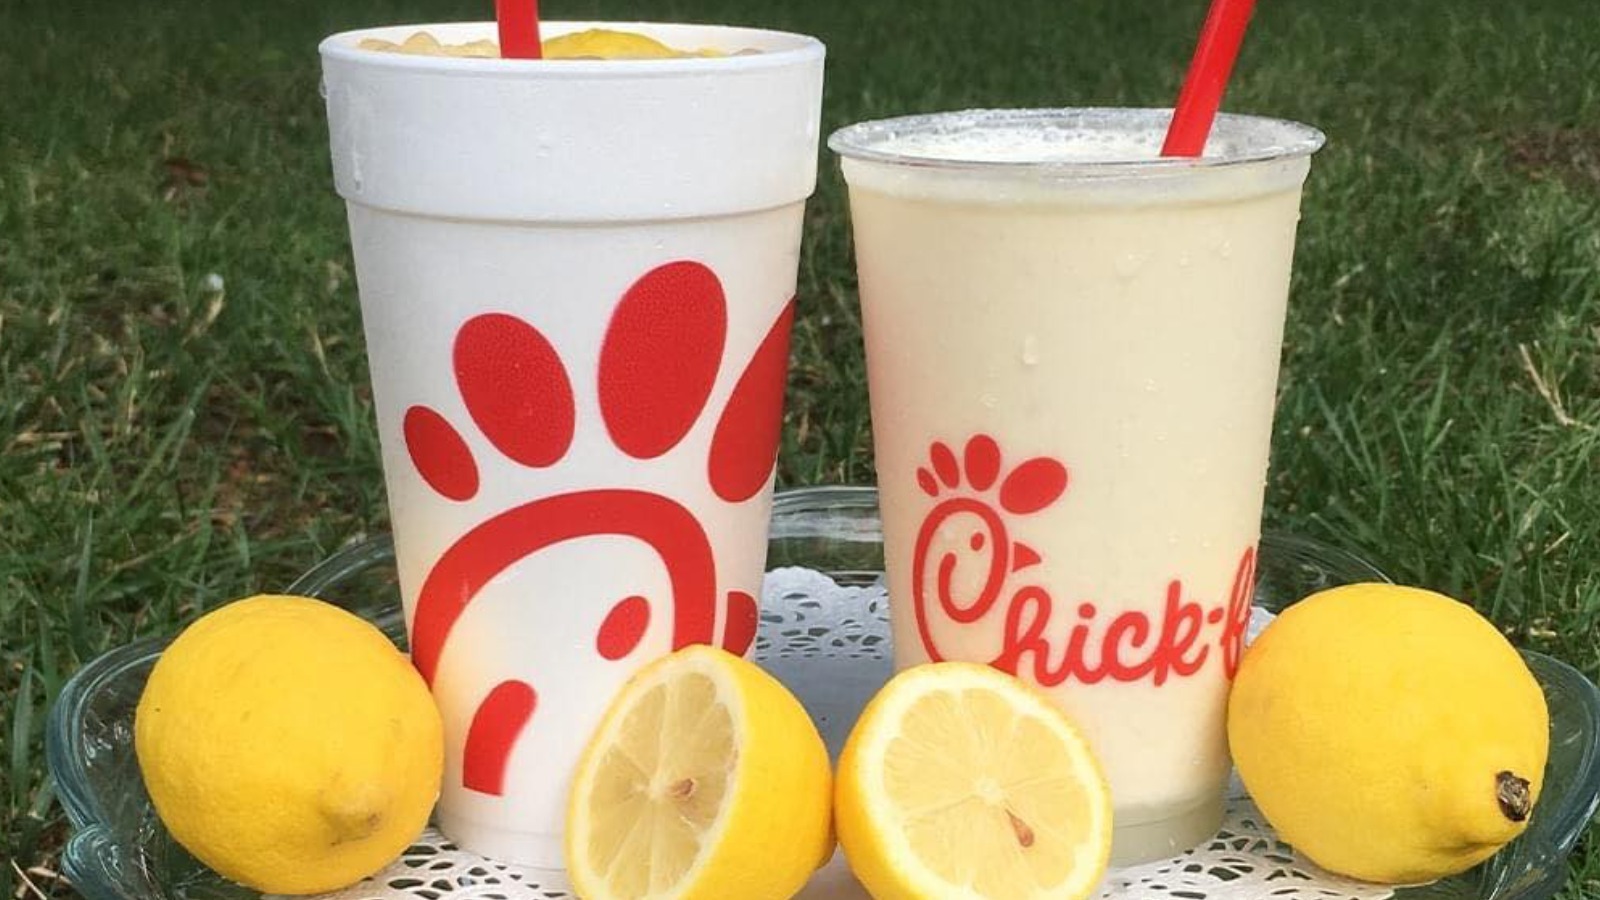 Is there sugar in Chick-fil-A?